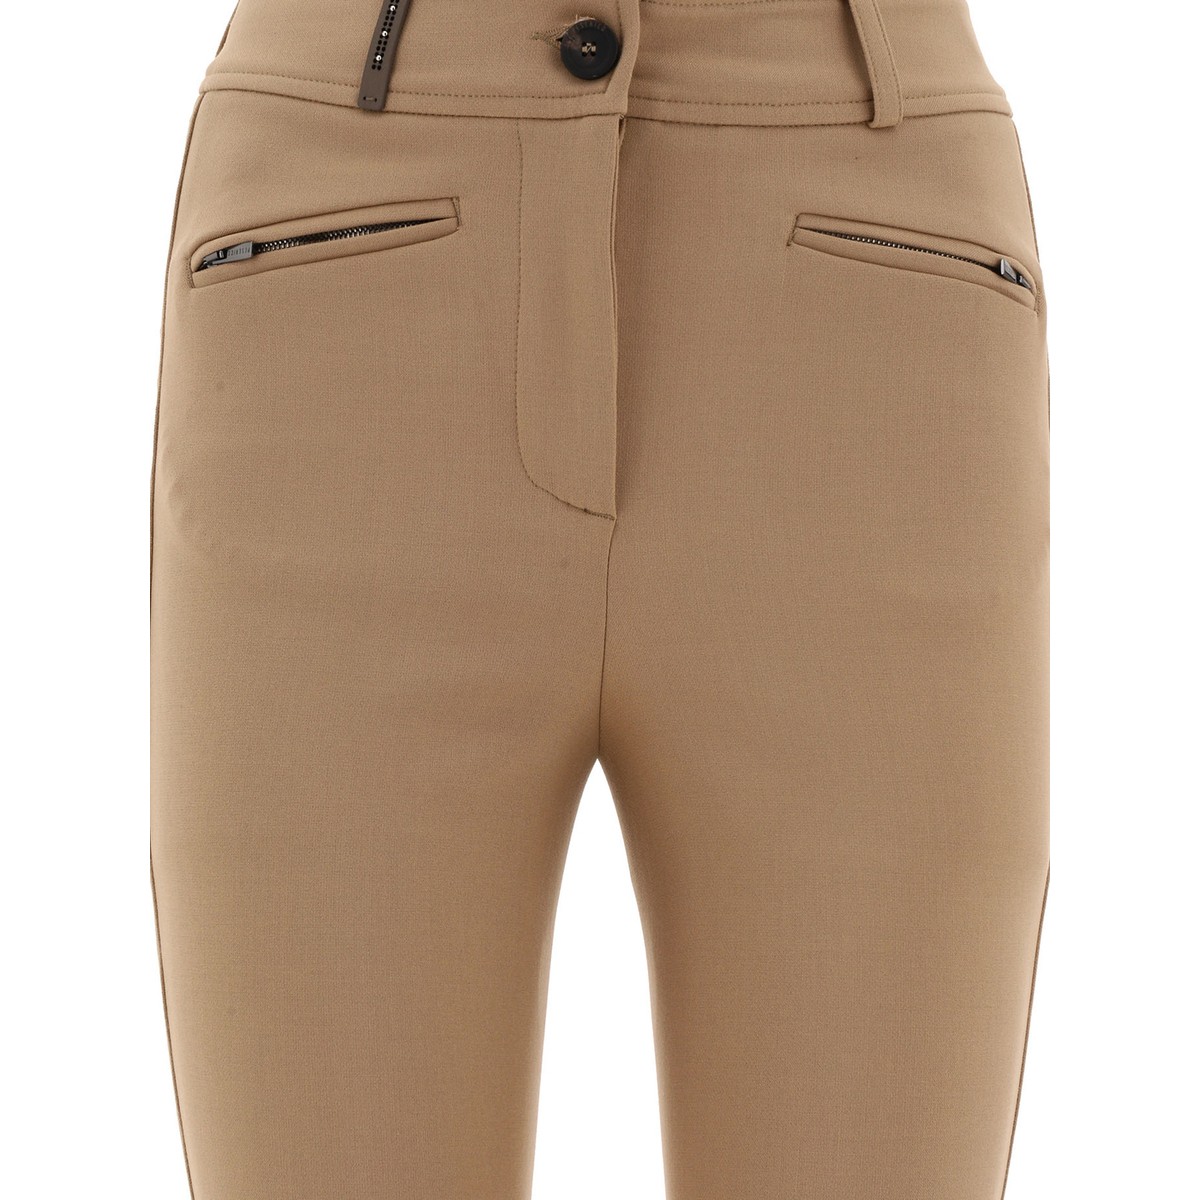 PESERICO ڥꥳ ١ Beige Trousers featuring zipped pockets ѥ ǥ P0467701934447 ڴǡ̵ۡڥåԥ̵ vi